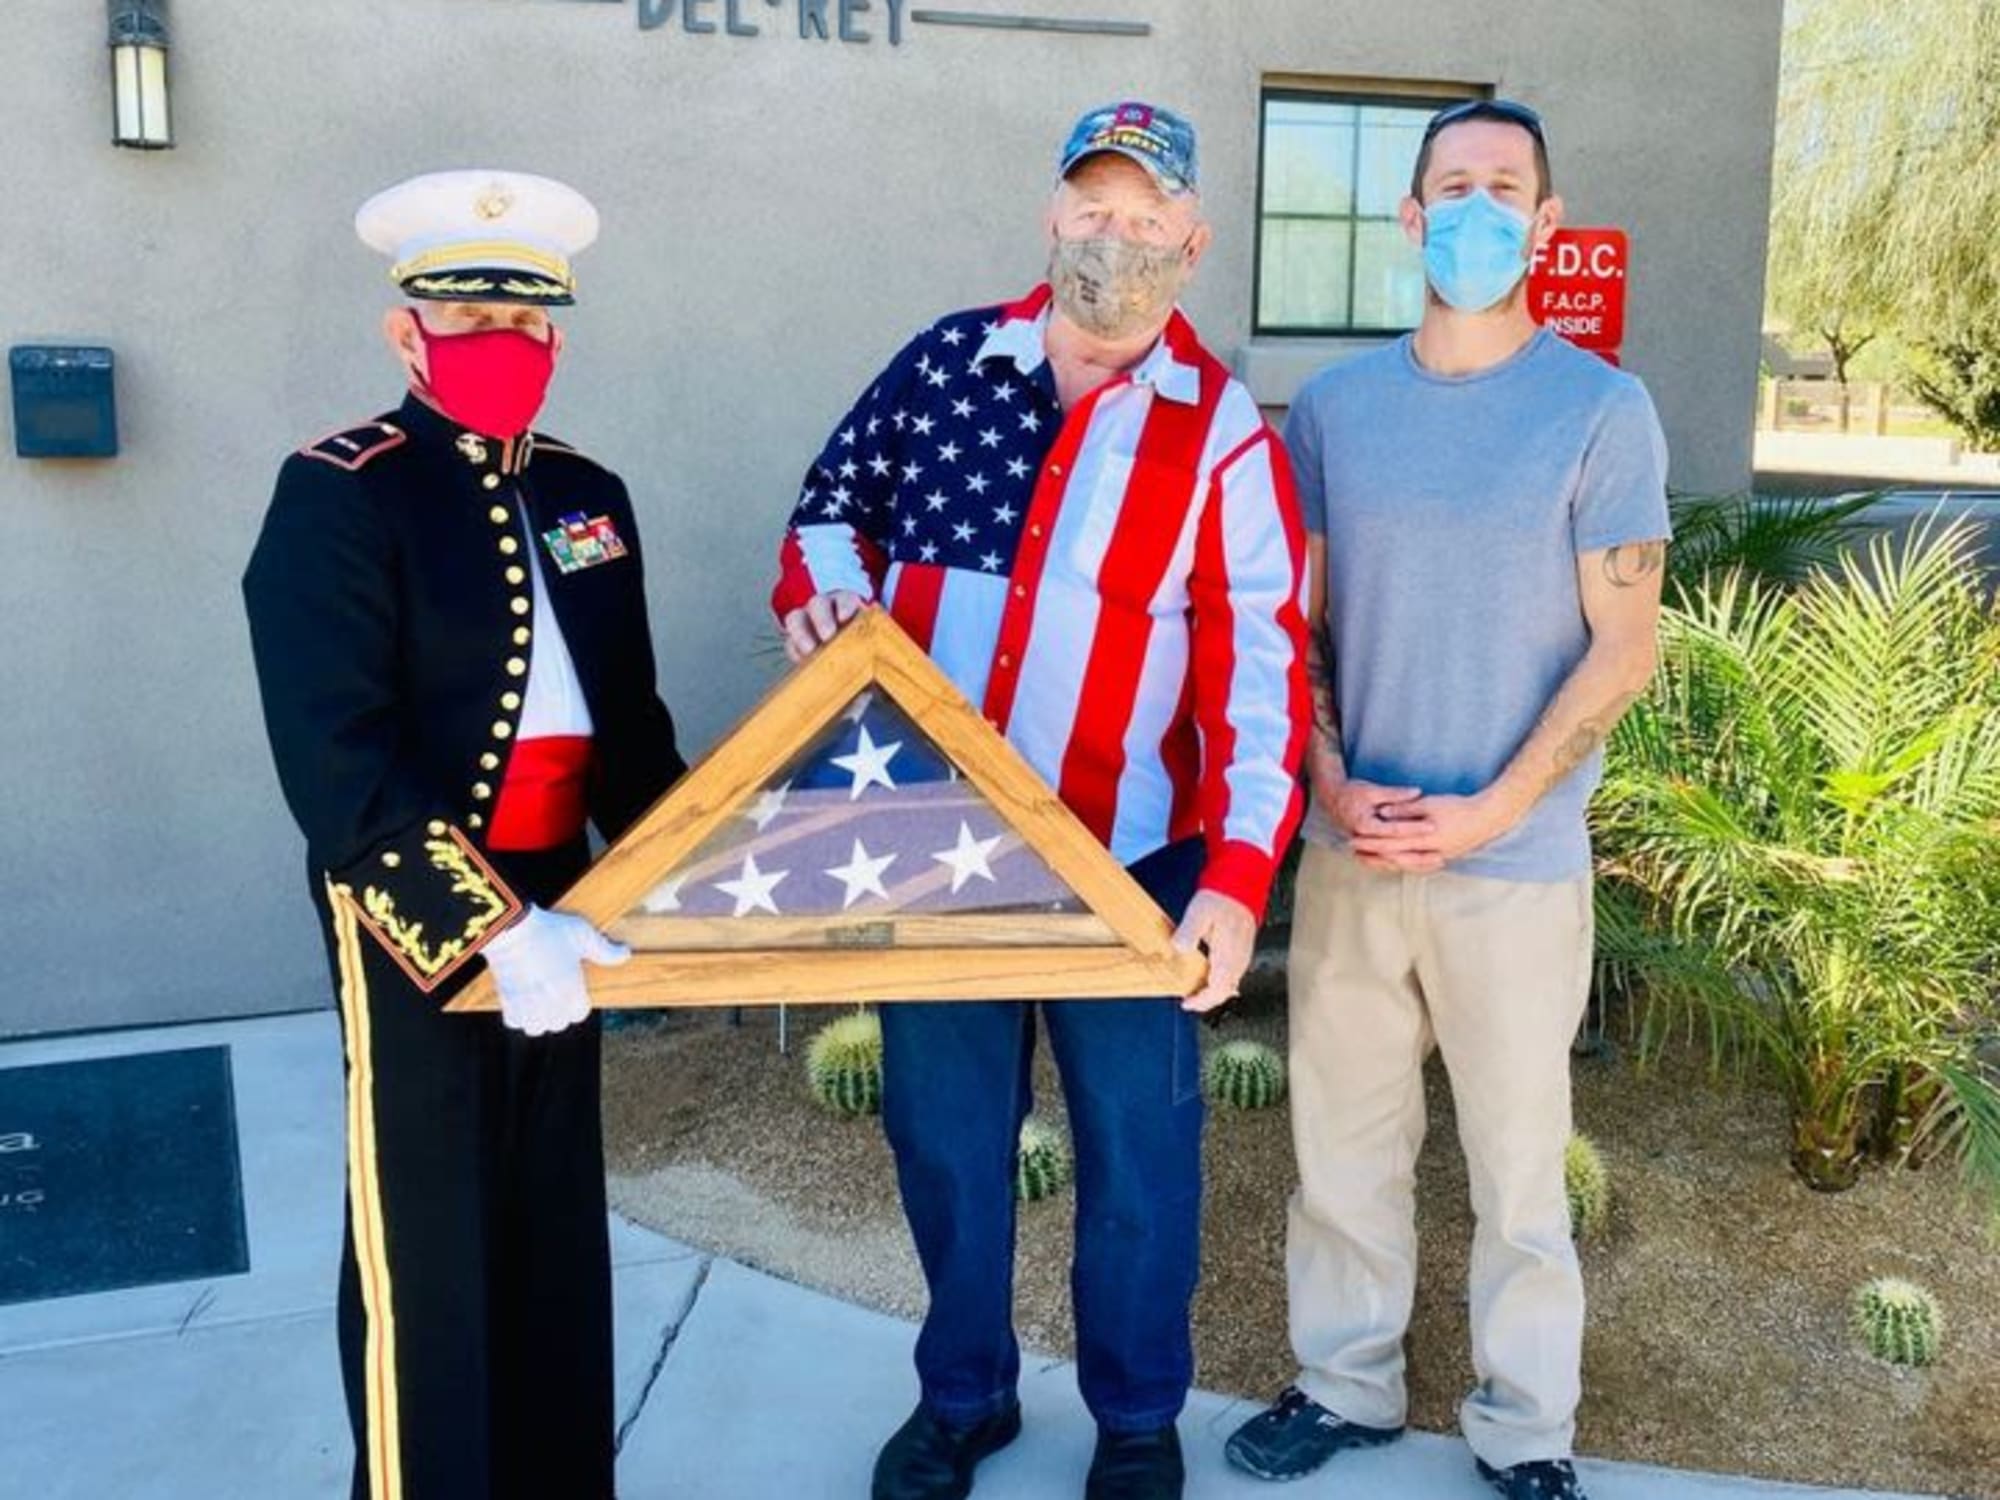 Veterans posing with a trifold flag at Hacienda Del Rey in Litchfield Park, AZ